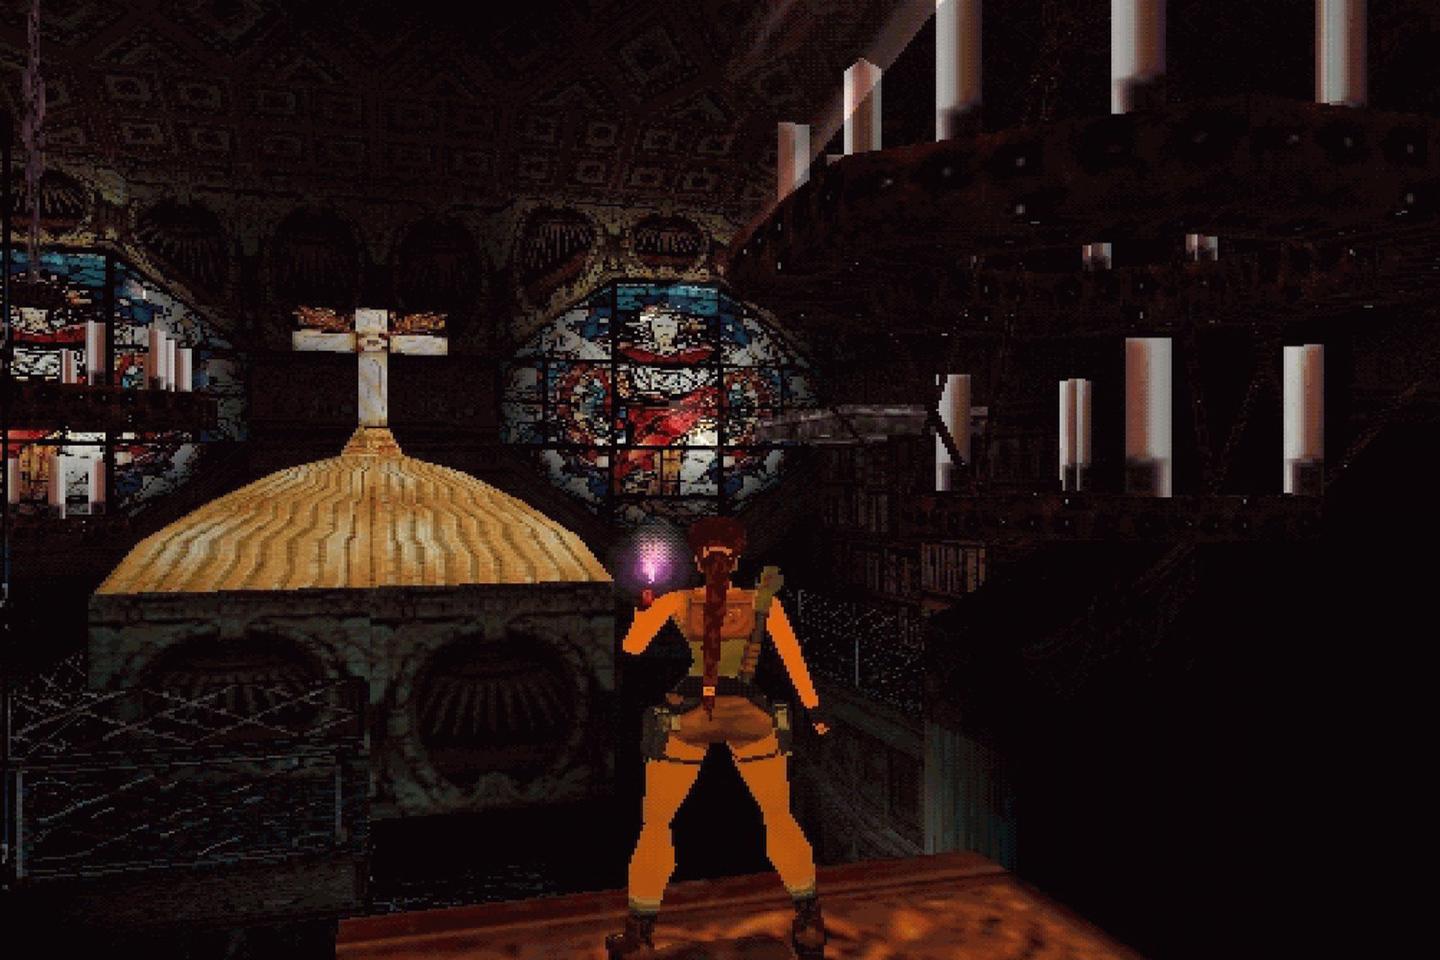 Lara stands in church facing cross and colorful stained glass windows.